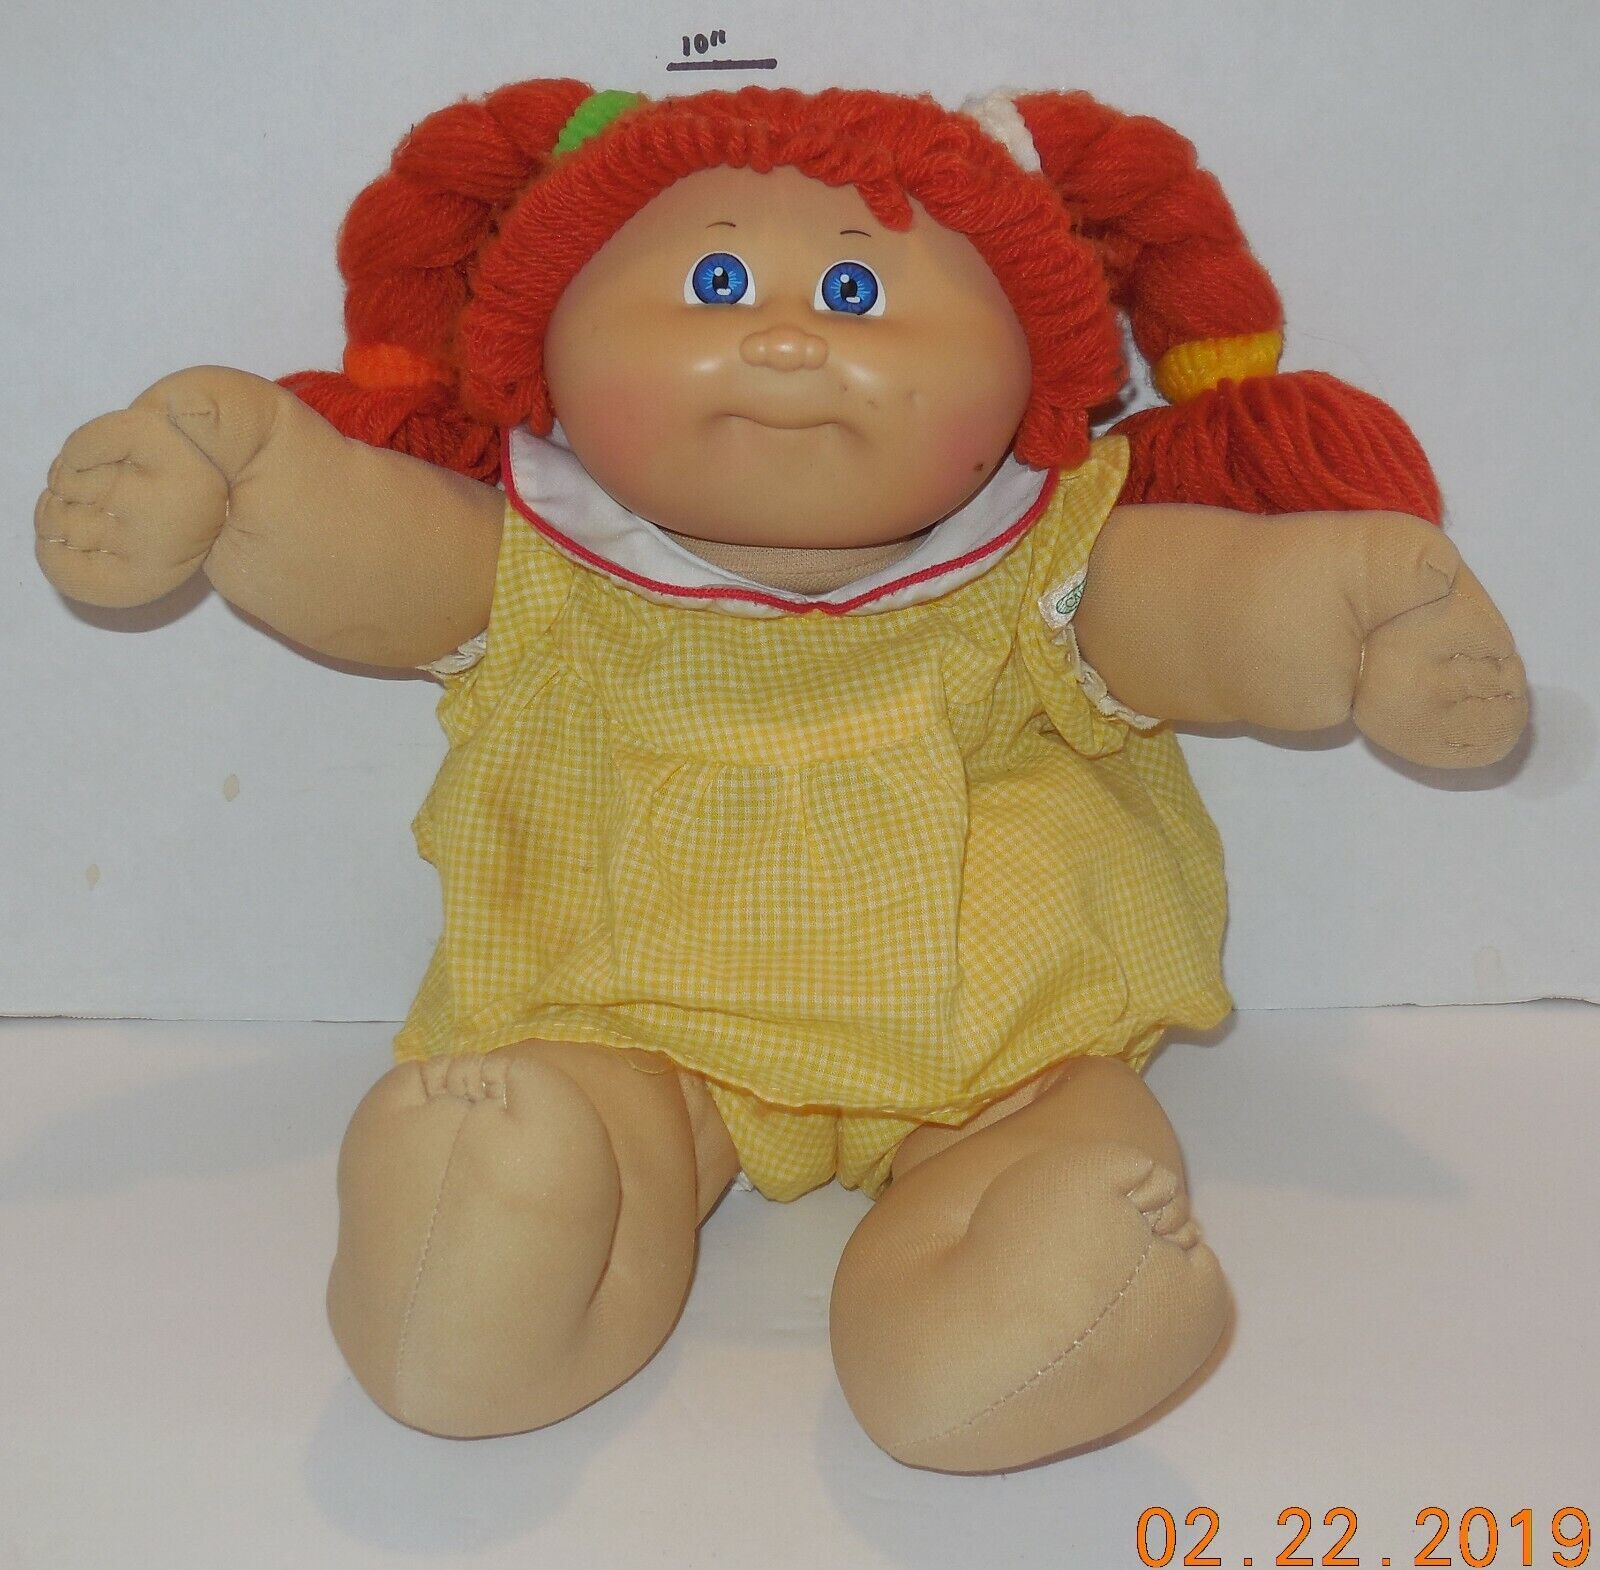 Primary image for 1985 Coleco Cabbage Patch Kids Plush Toy Doll Girl CPK Xavier Roberts OAA Orange